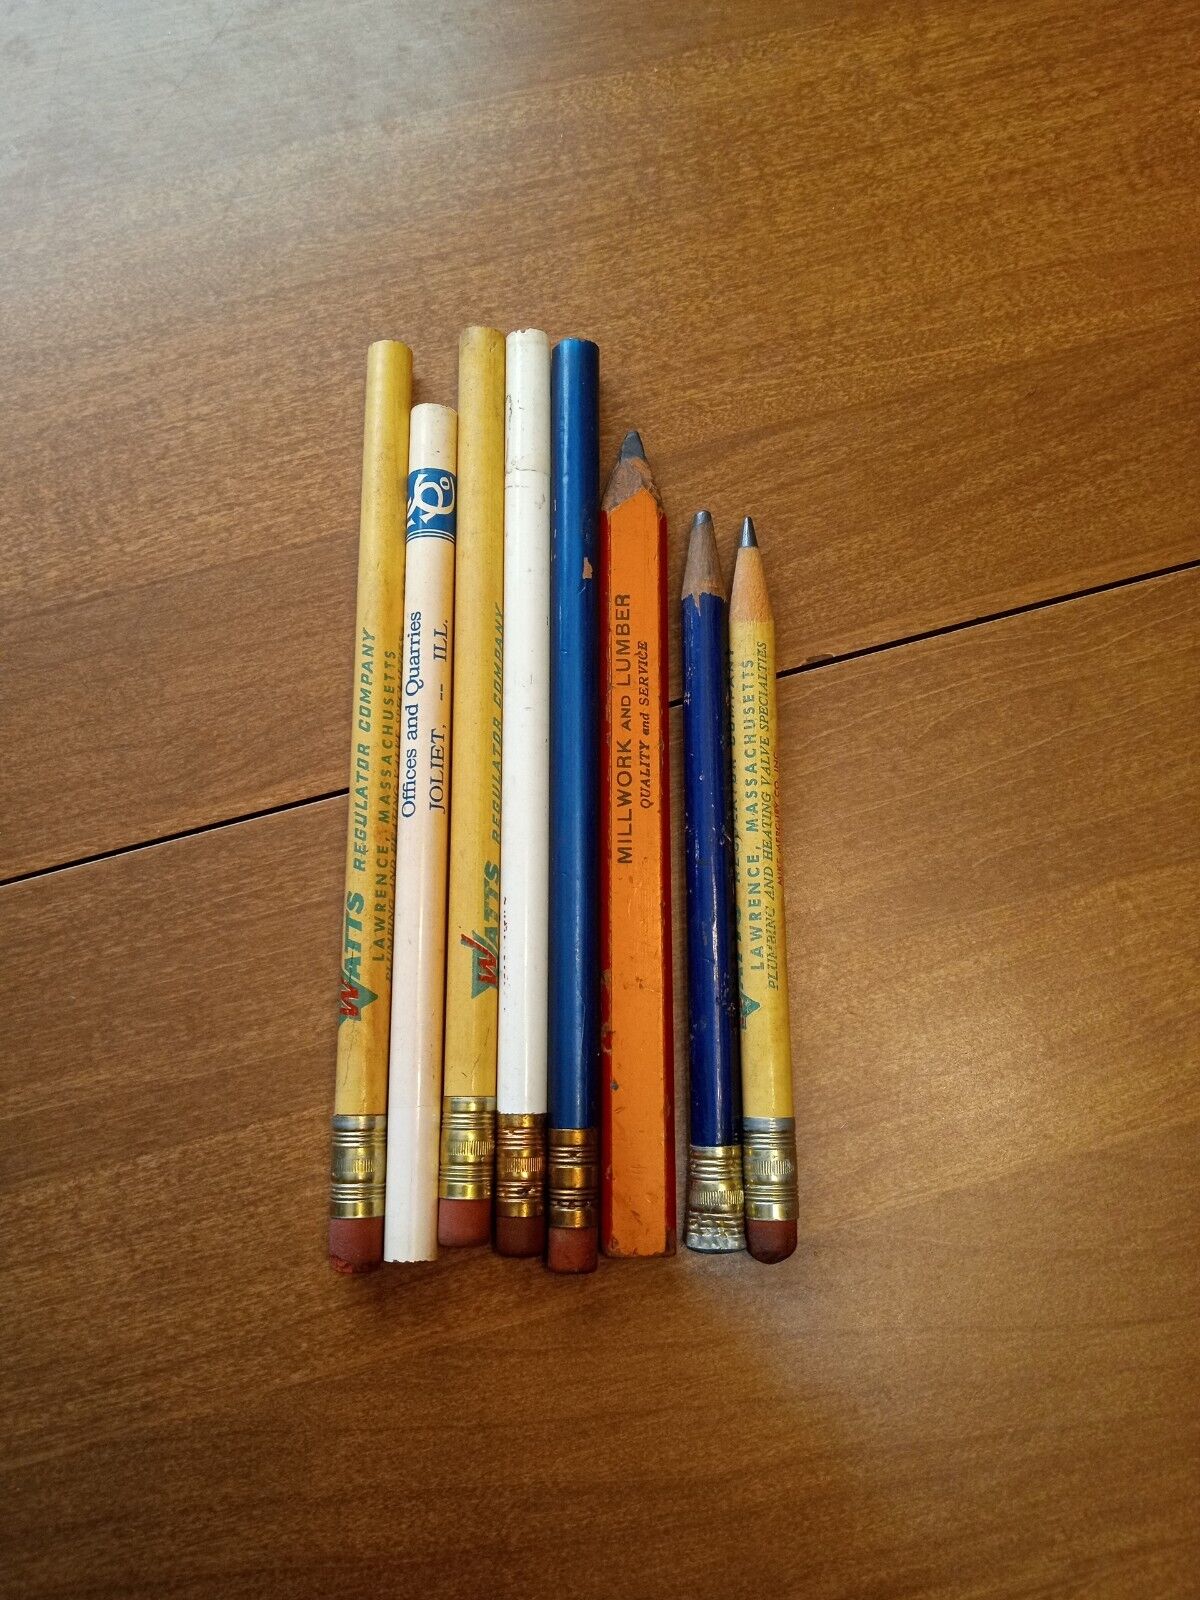 Vintage Large Size Novelty Pencils Lot Of 8 Sharpened And Unsharpened Very Rare